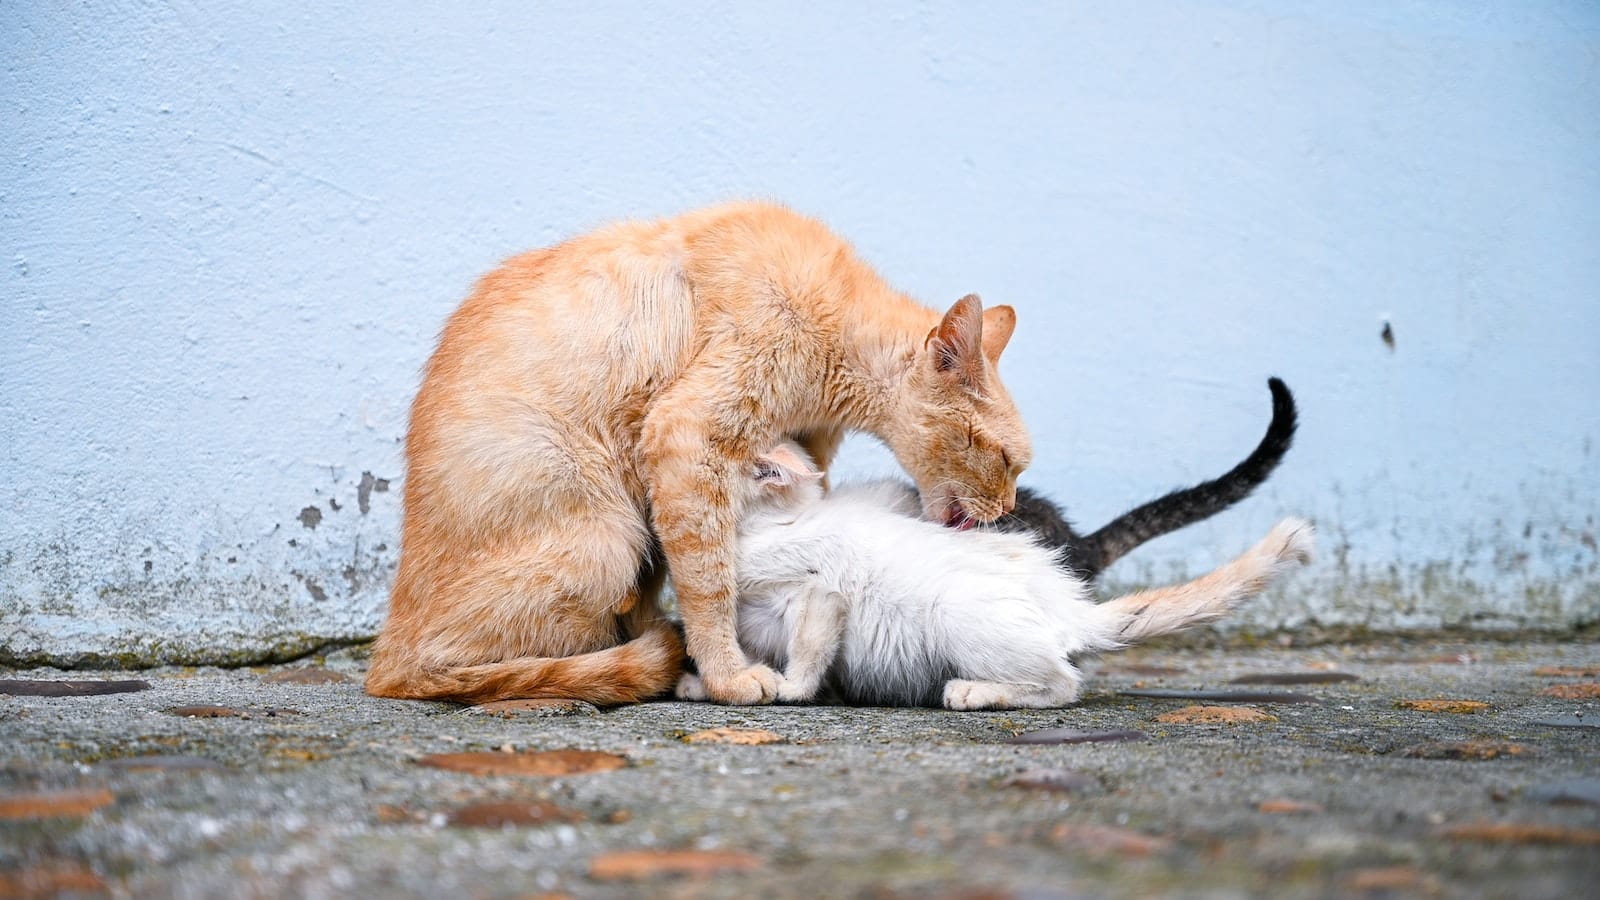 Photo Of A Cat With Kittens